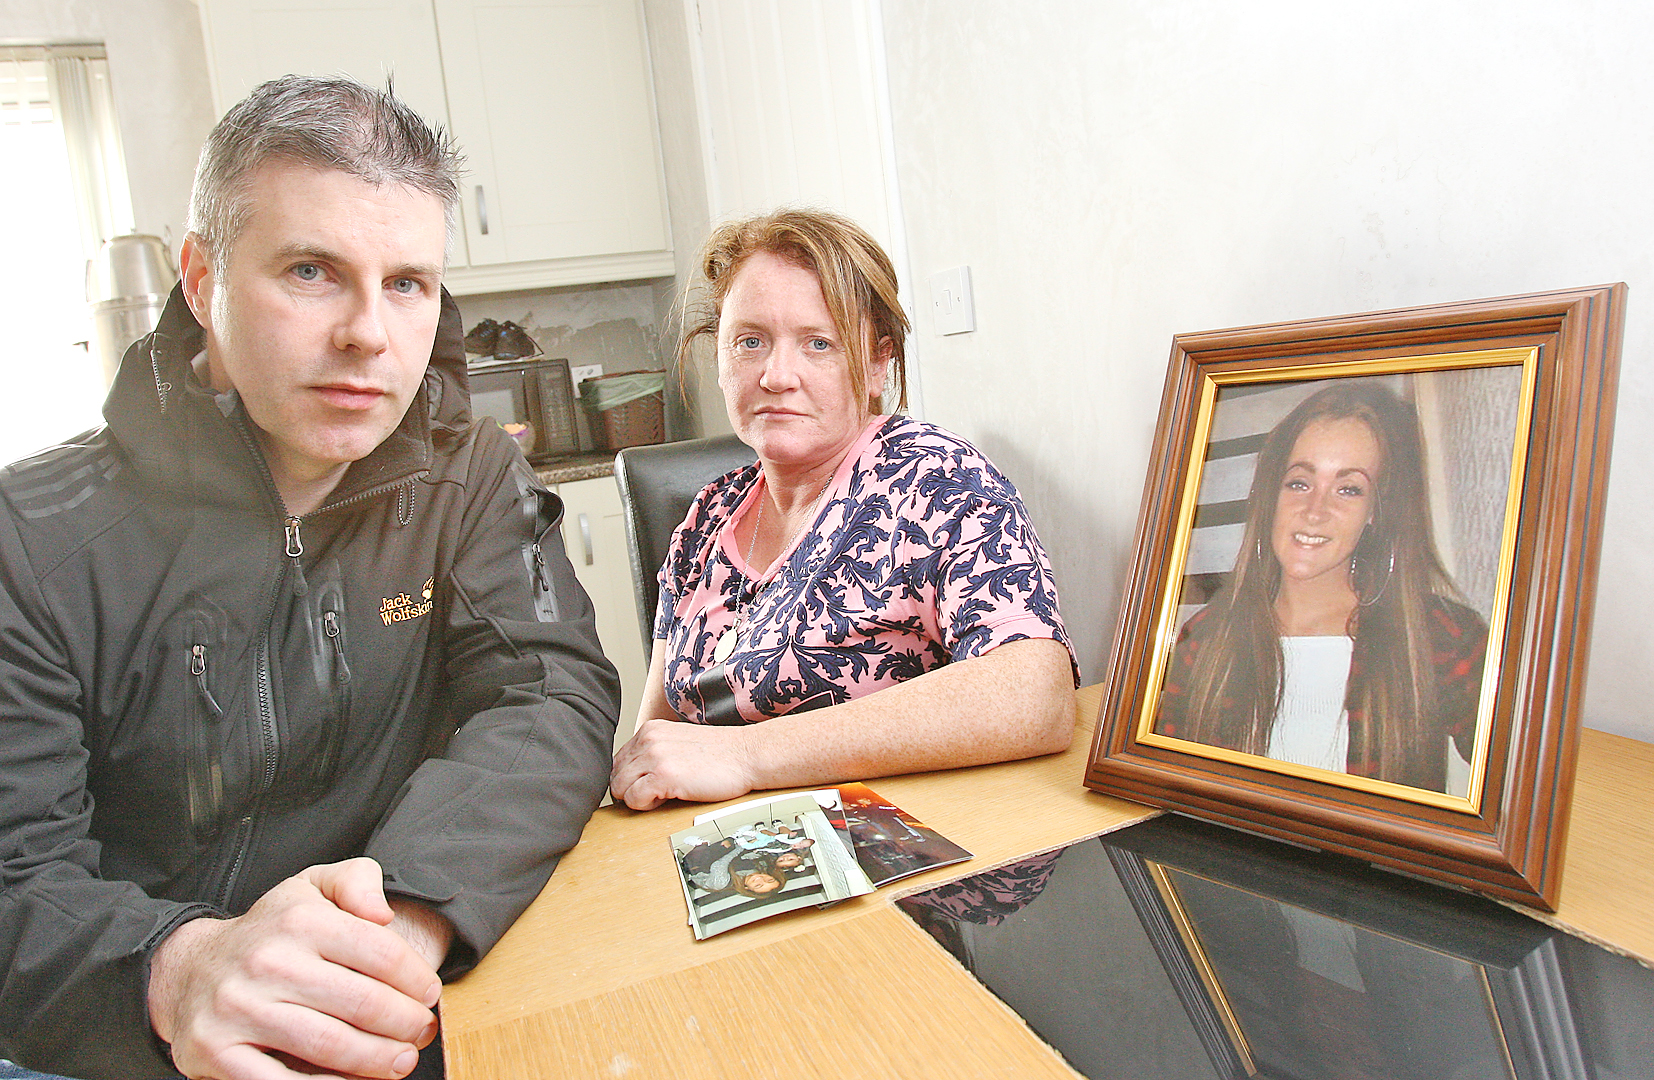 Noreen Lavery and Cllr Stevie Corr with family photos of Caoimhe, a mother-of-two who took her own life aged 21 after battling mental illness